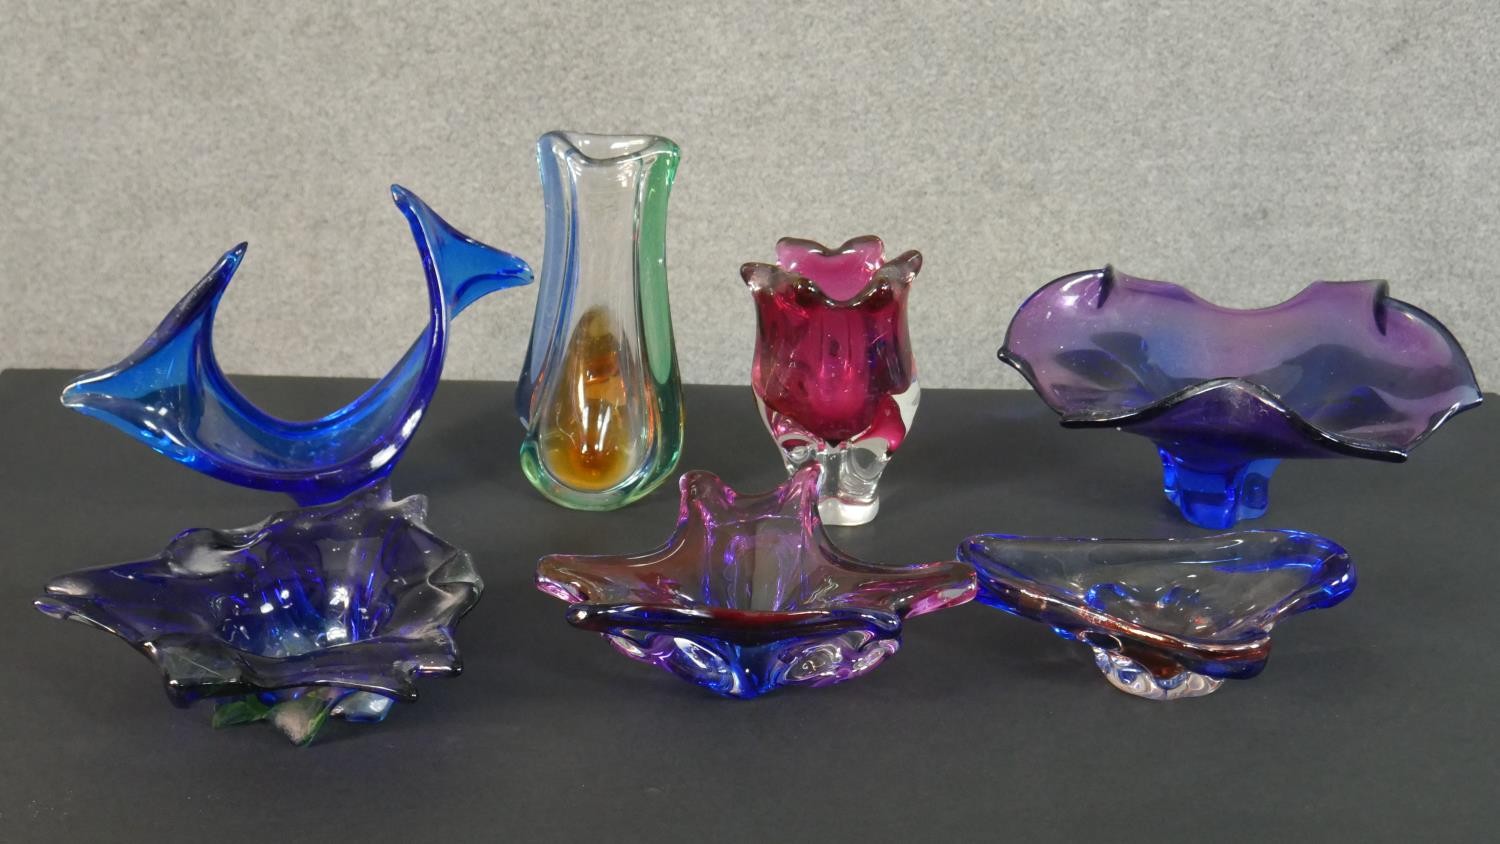 Seven 1960's Sommerso coloured abstract 'exploding glass' design bowls and vases. Each with a